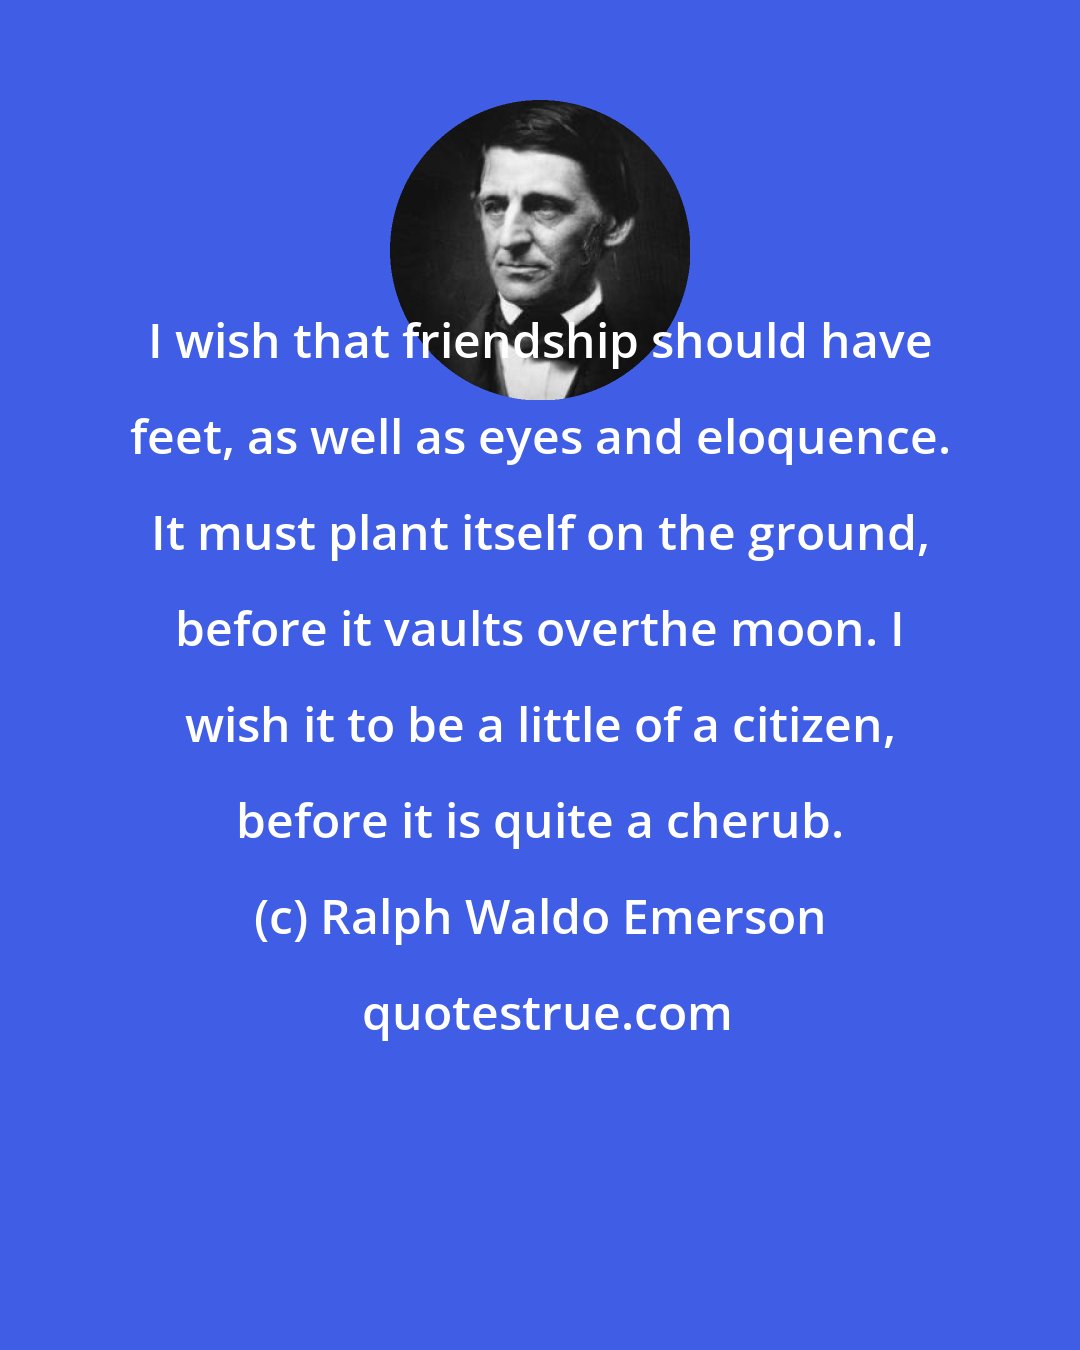 Ralph Waldo Emerson: I wish that friendship should have feet, as well as eyes and eloquence. It must plant itself on the ground, before it vaults overthe moon. I wish it to be a little of a citizen, before it is quite a cherub.